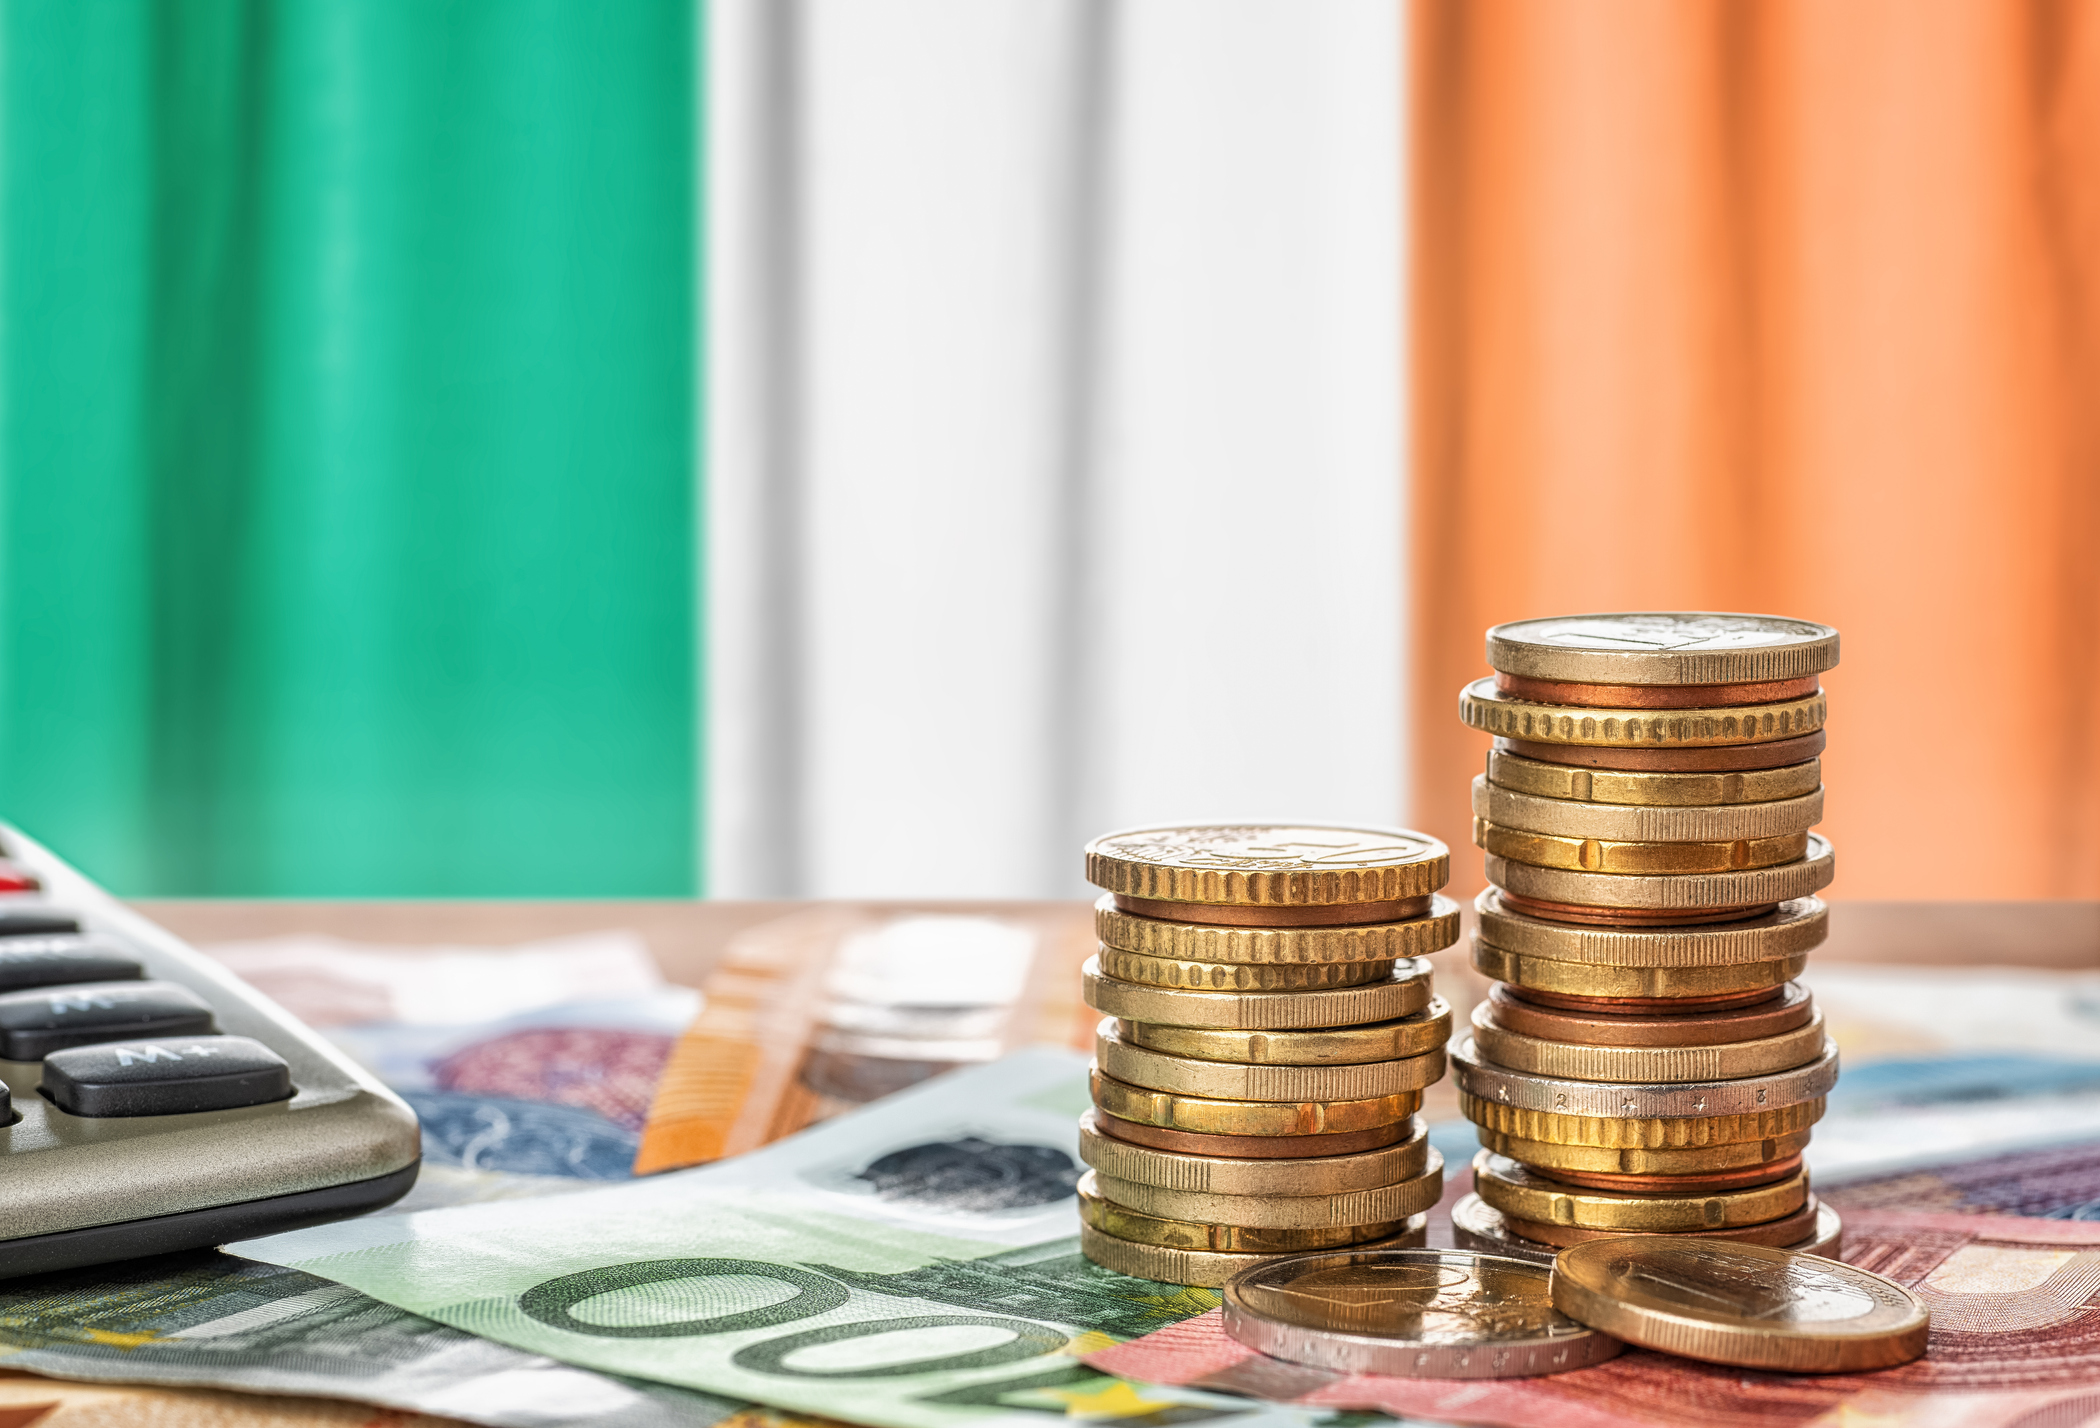 Euro banknotes and coins in front of the national flag of Ireland